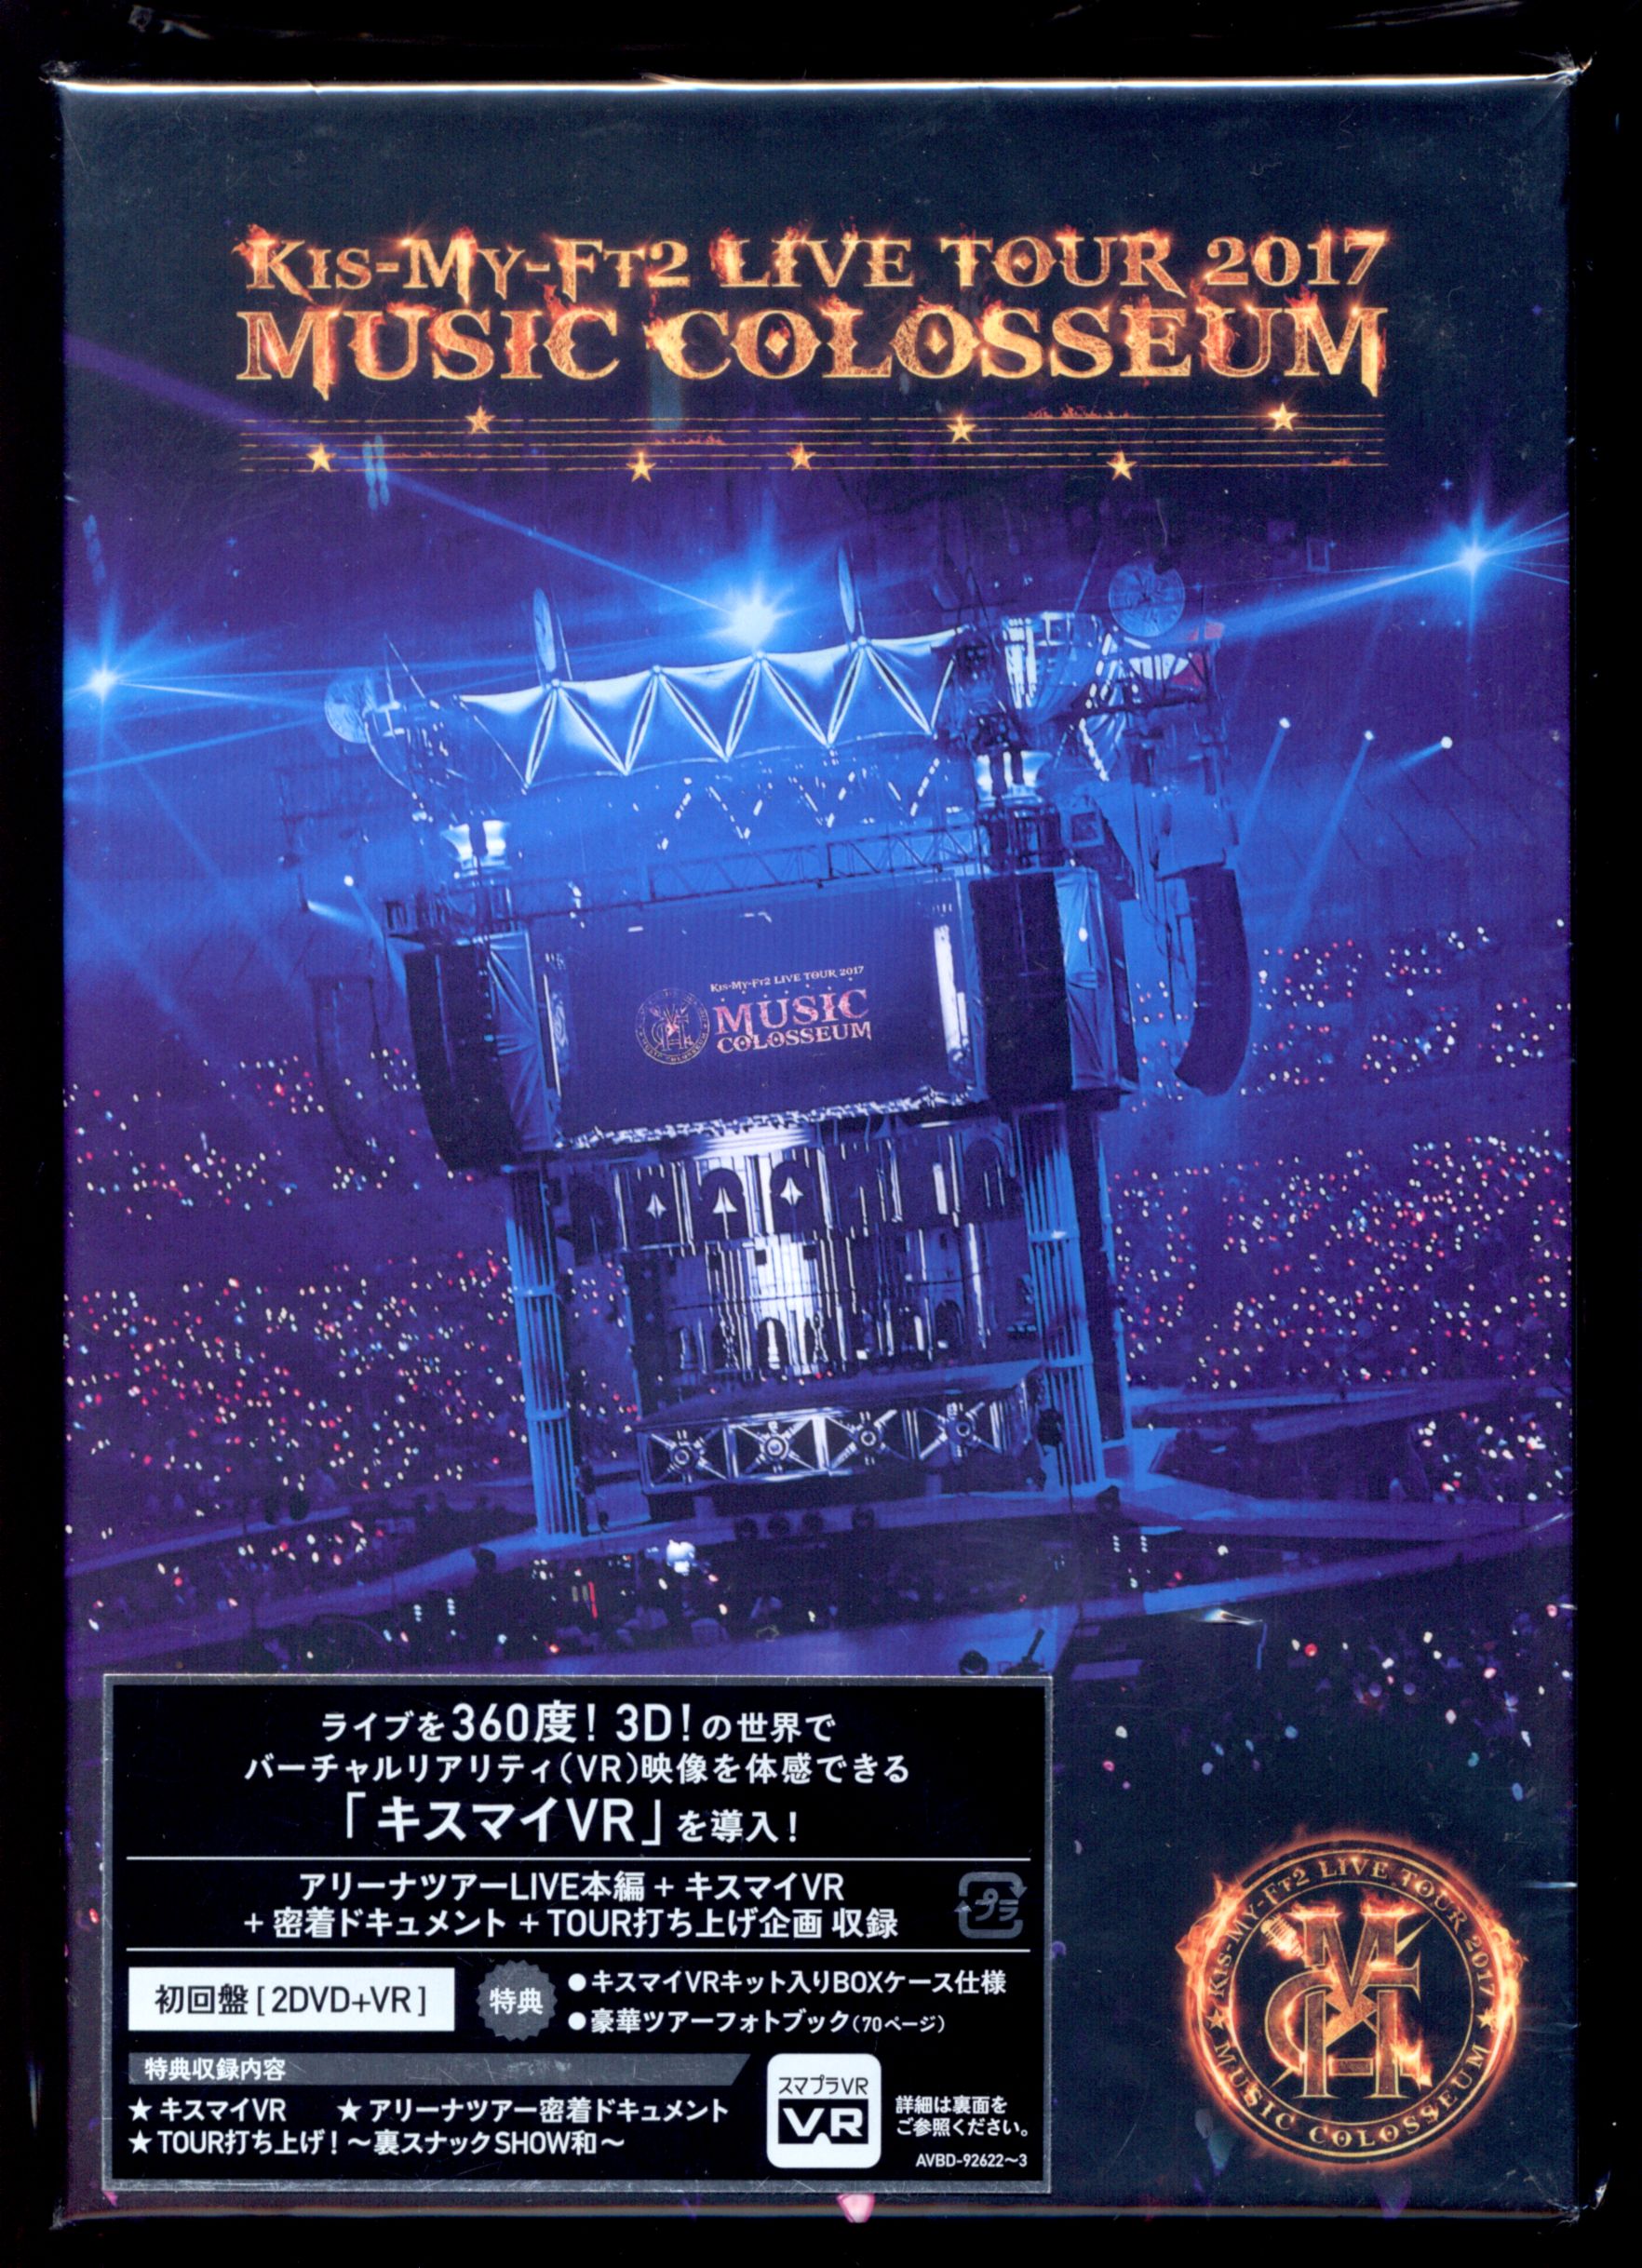 Kis-My-Ft2 2017 MUSIC COLOSSEUM DVD - その他